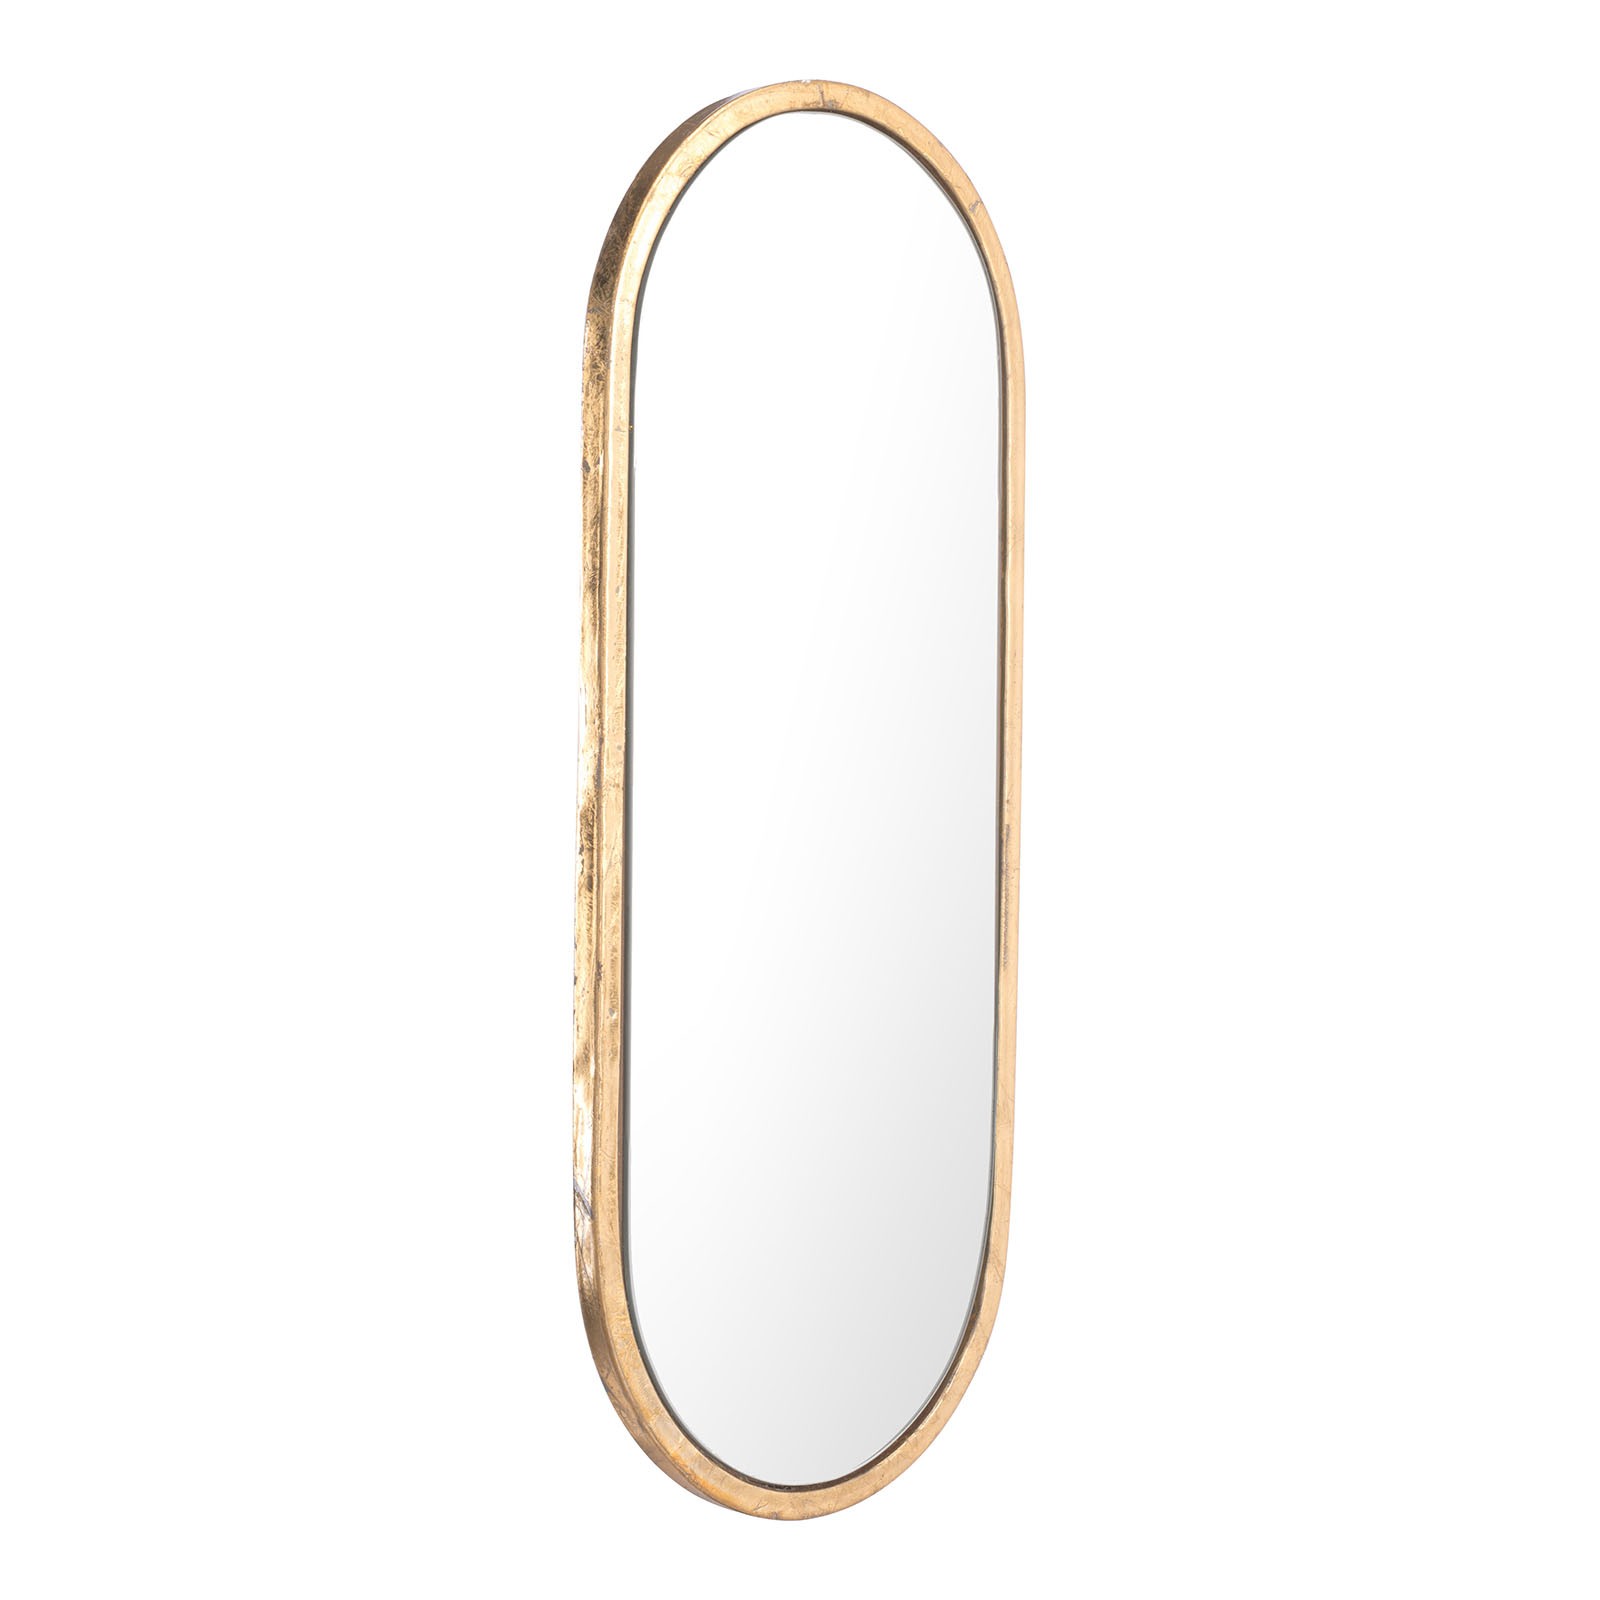 Oval Mirror in Gold